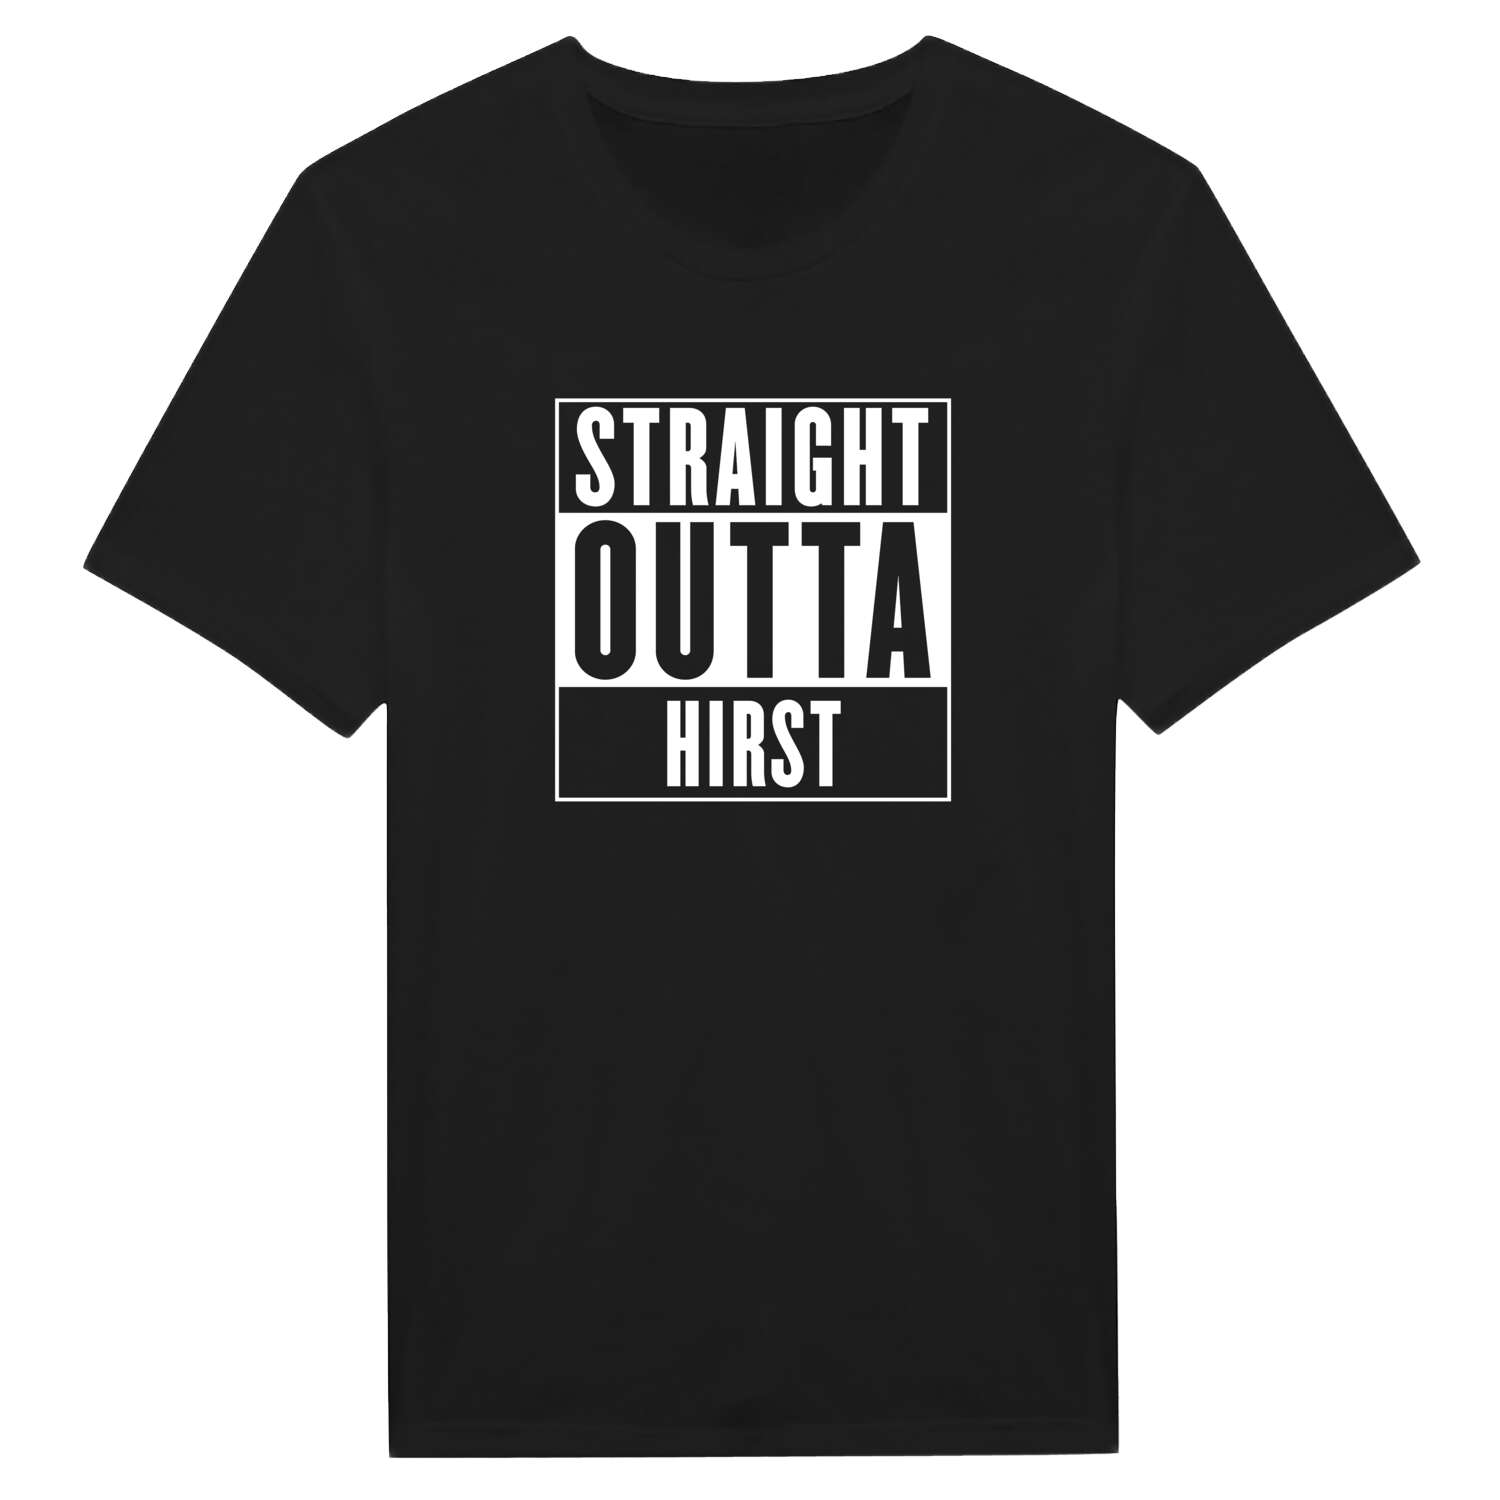 Hirst T-Shirt »Straight Outta«